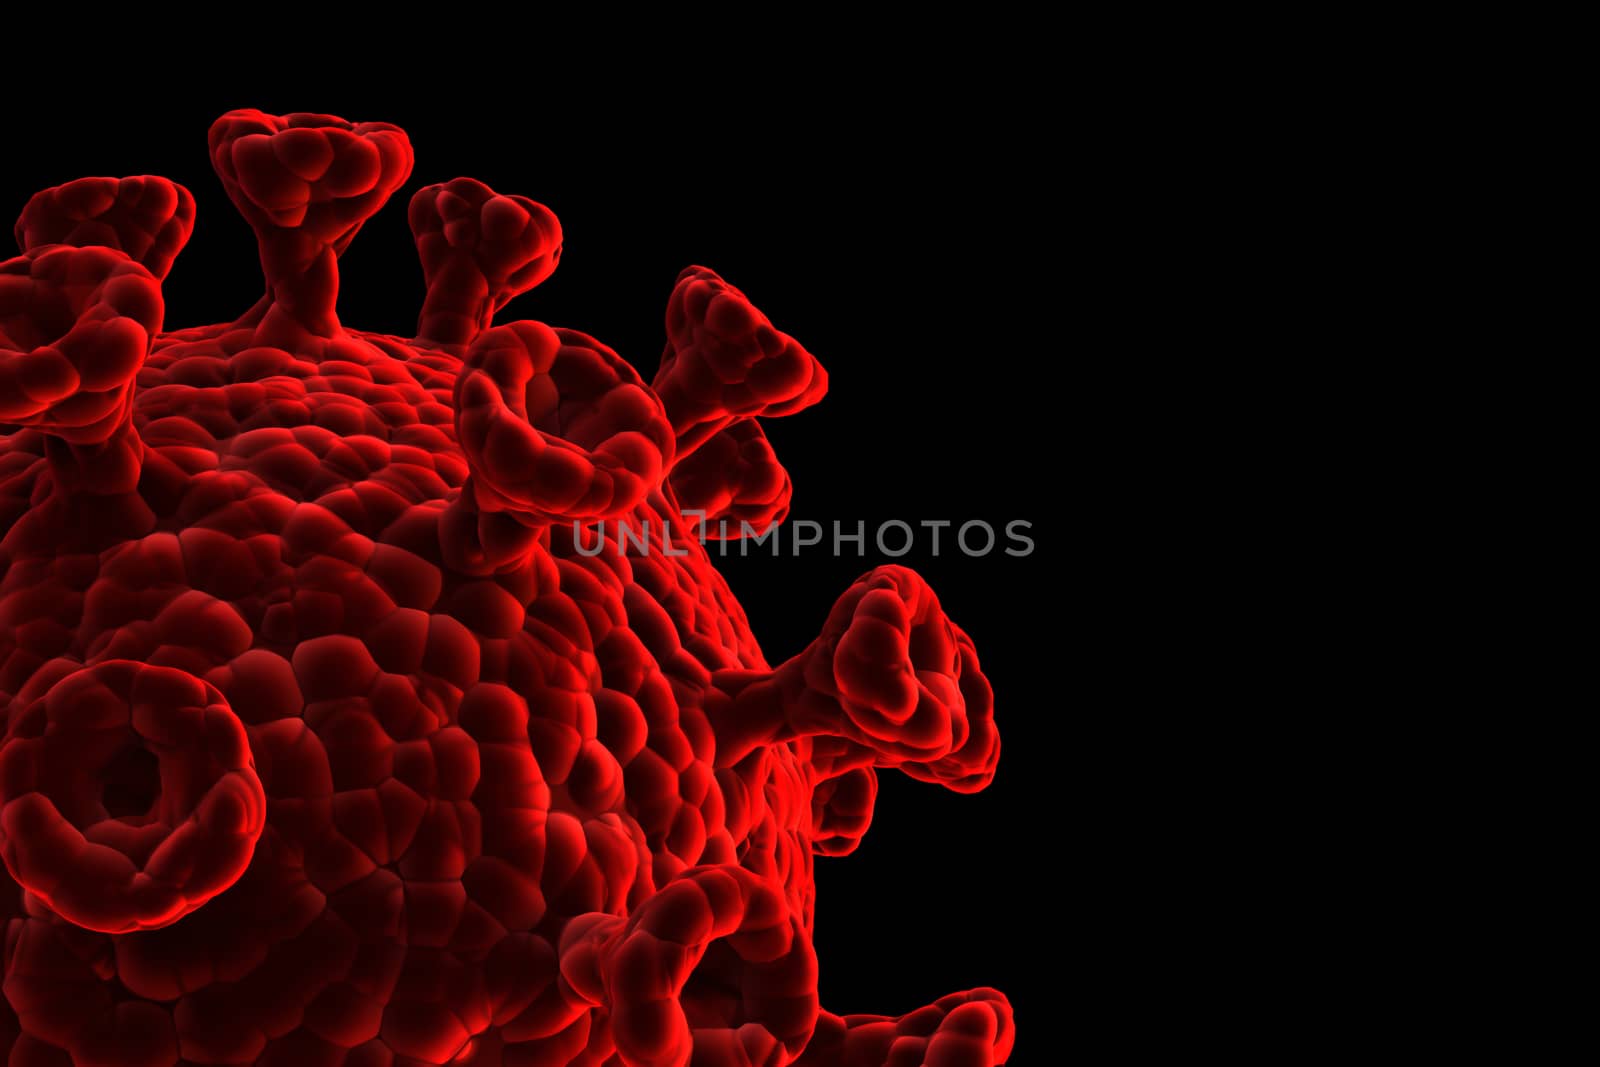 An illustration showing the structure of an epidemic virus. 3D rendering of a coronavirus on a black background